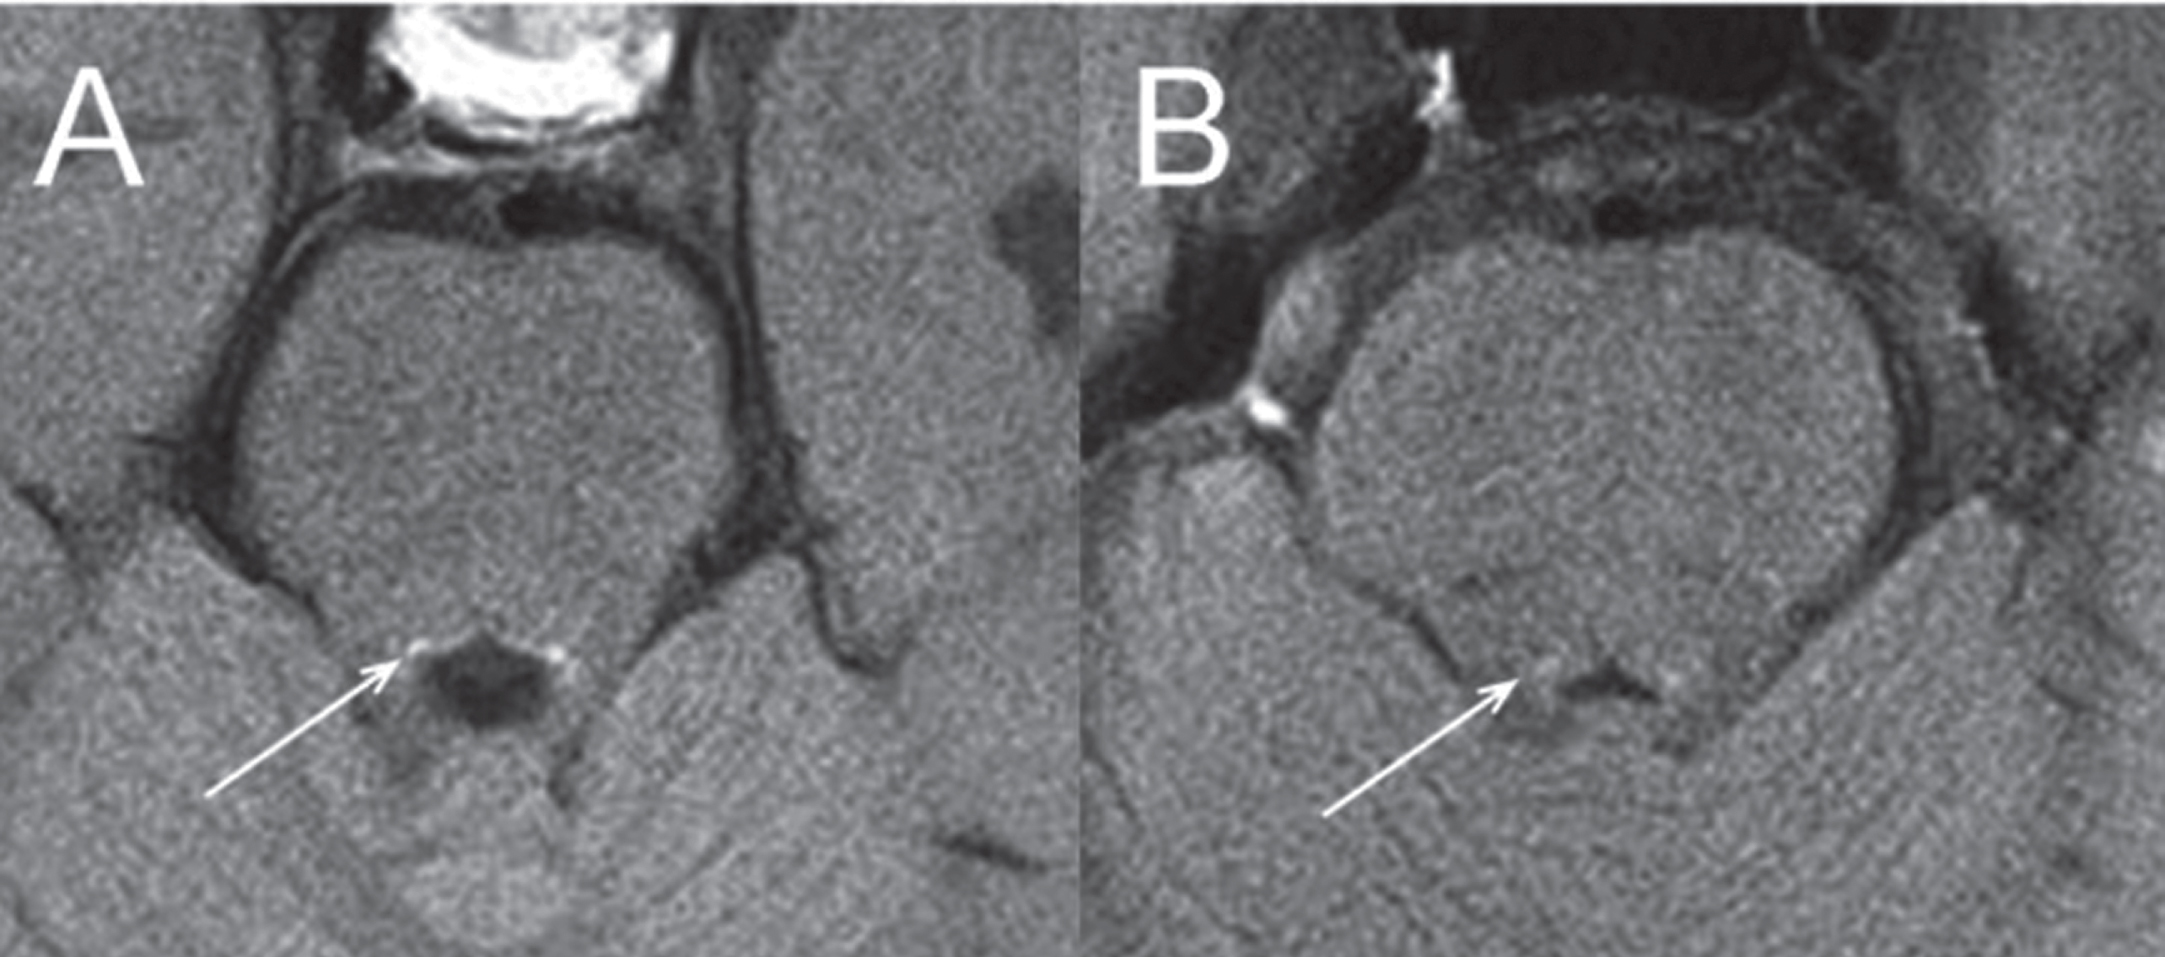 Neuromelanin-sensitive MRI imaging of the locus coeruleus/subcoeruleus. Axial neuromelanin-sensitive T-weighted images of the locus in a healthy volunteer (A) and a patient with Parkinson’s disease (B). The locus area (arrows) is visible as an area of increased signal intensity. With permission from [105].